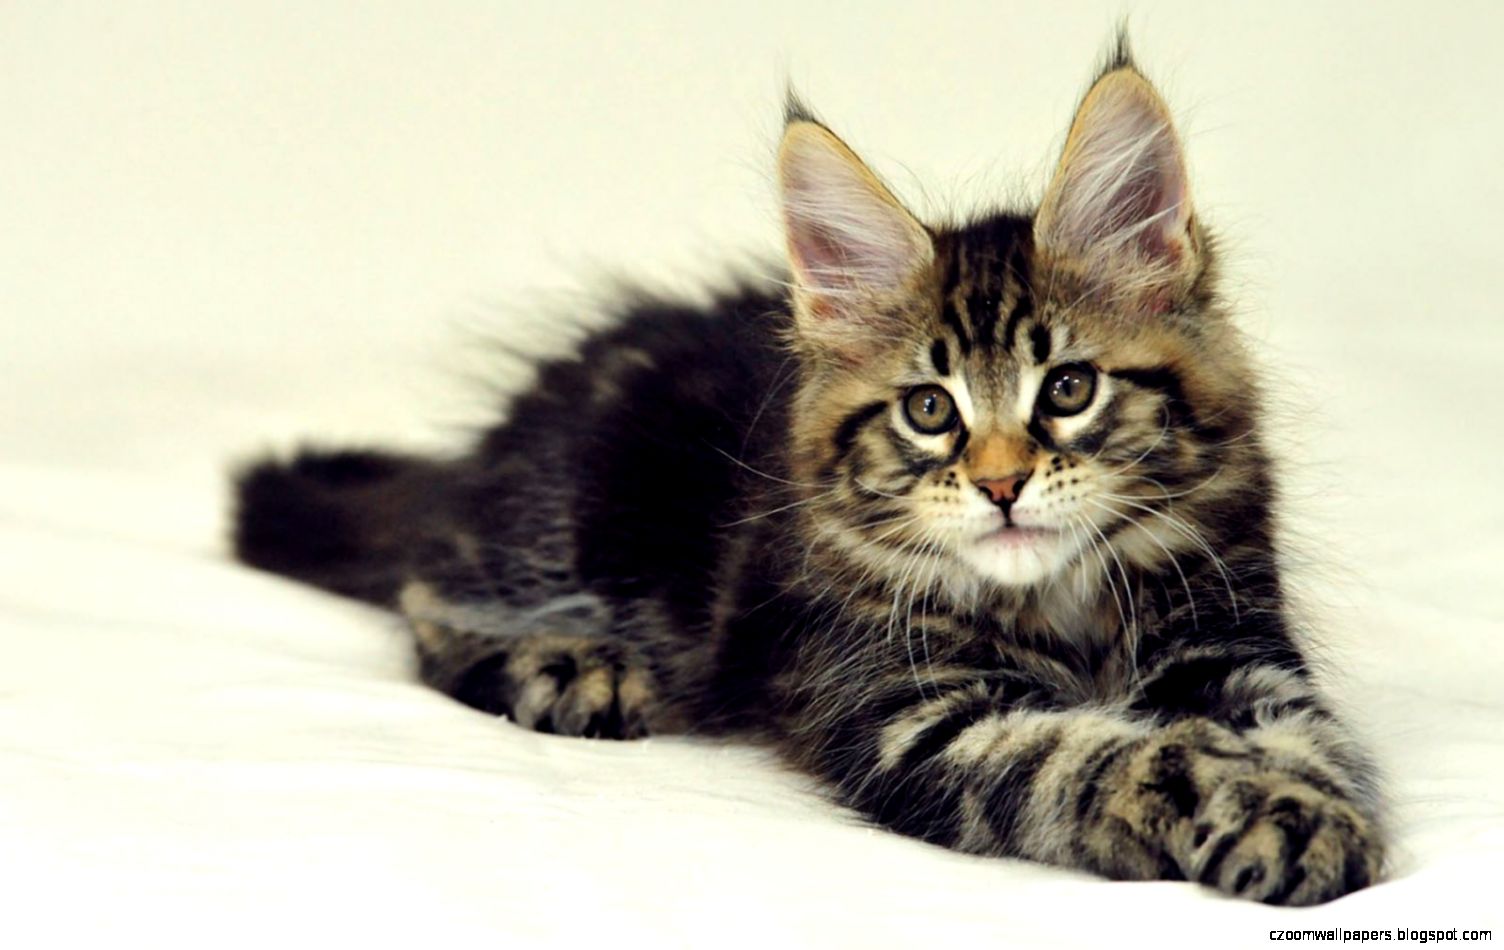 Awesome Hd Wallpapers Of Maine Coon Cat In Grass